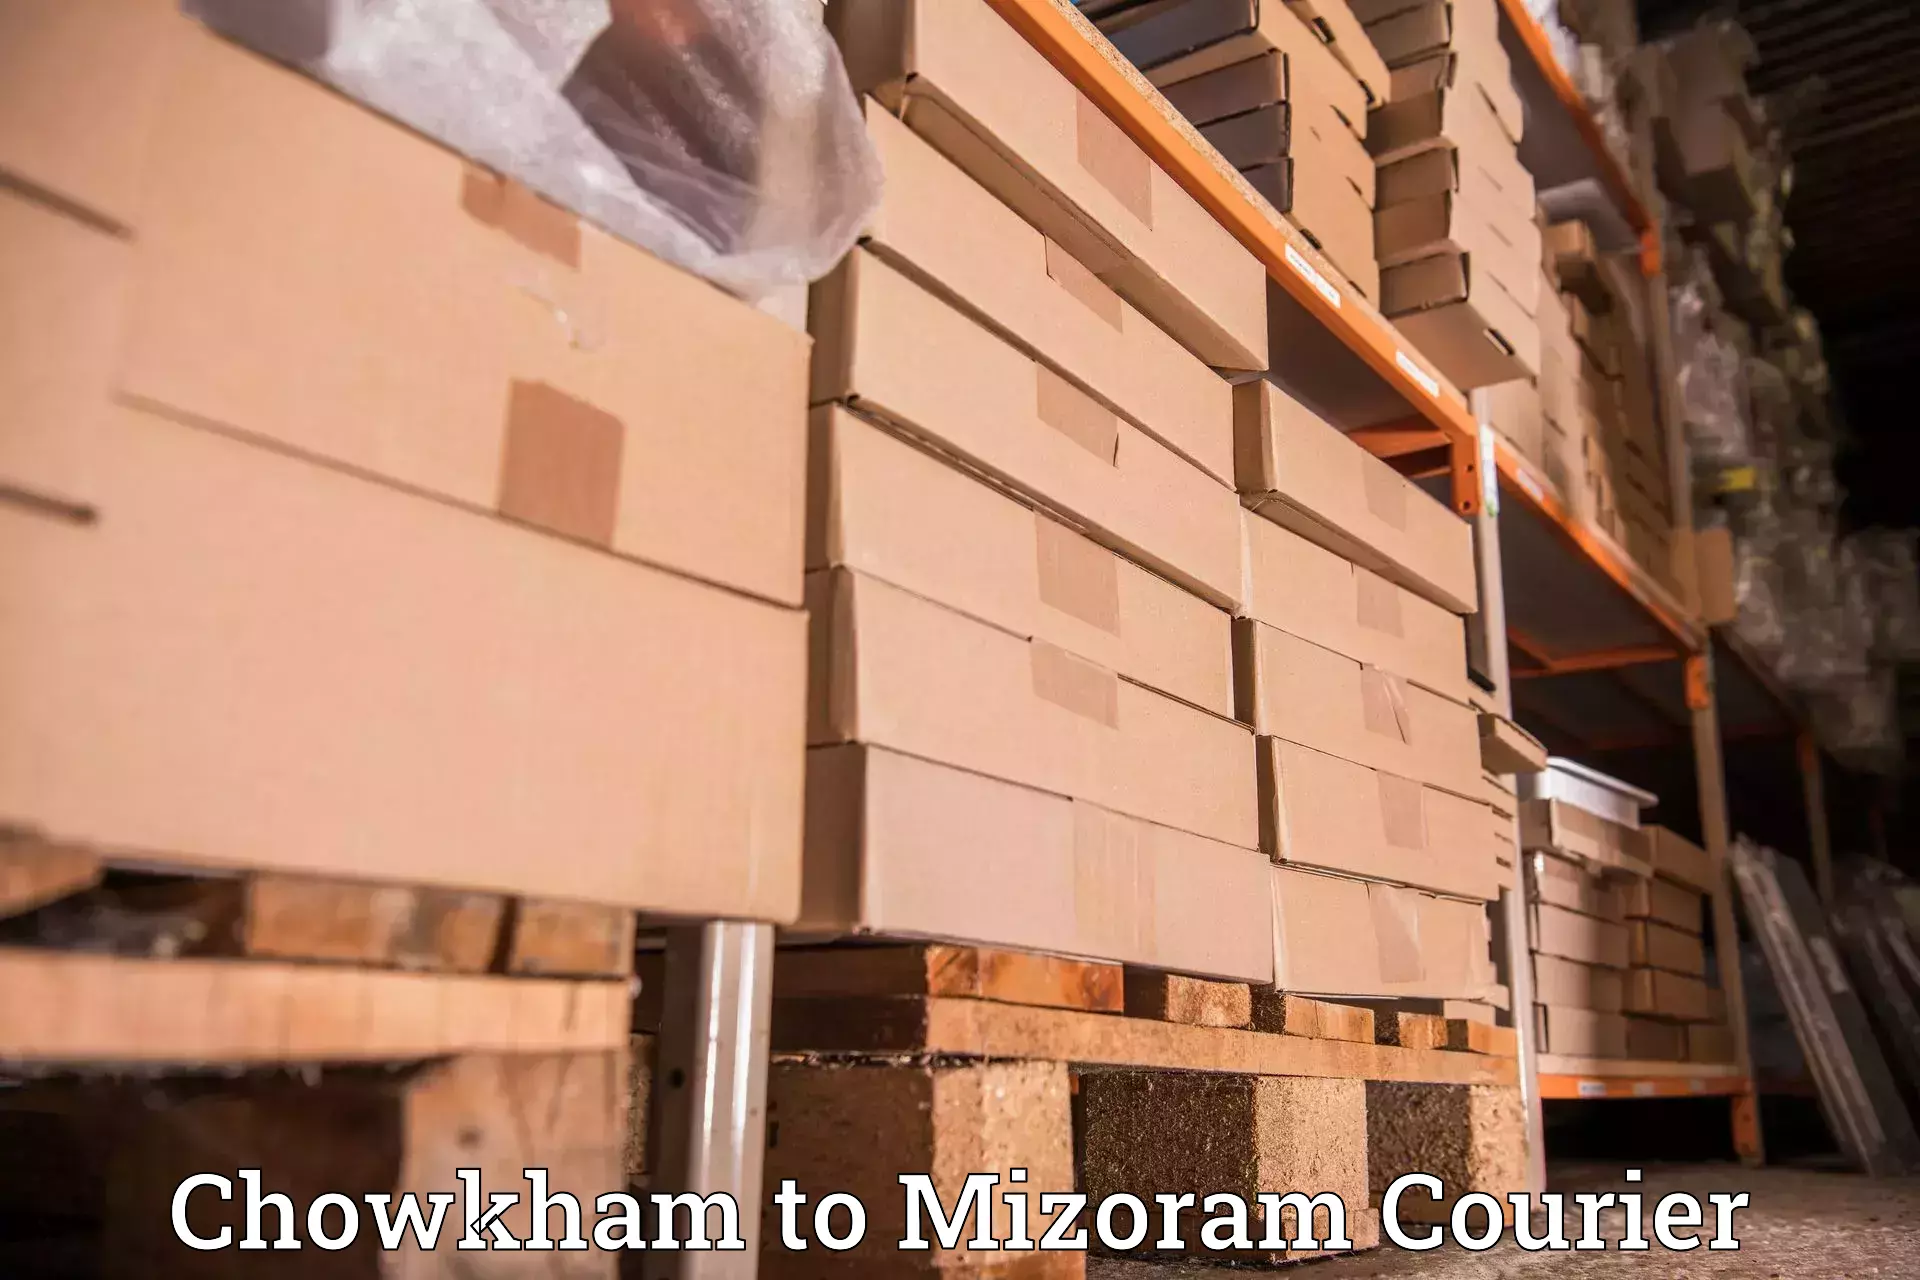 Courier service booking Chowkham to Mizoram